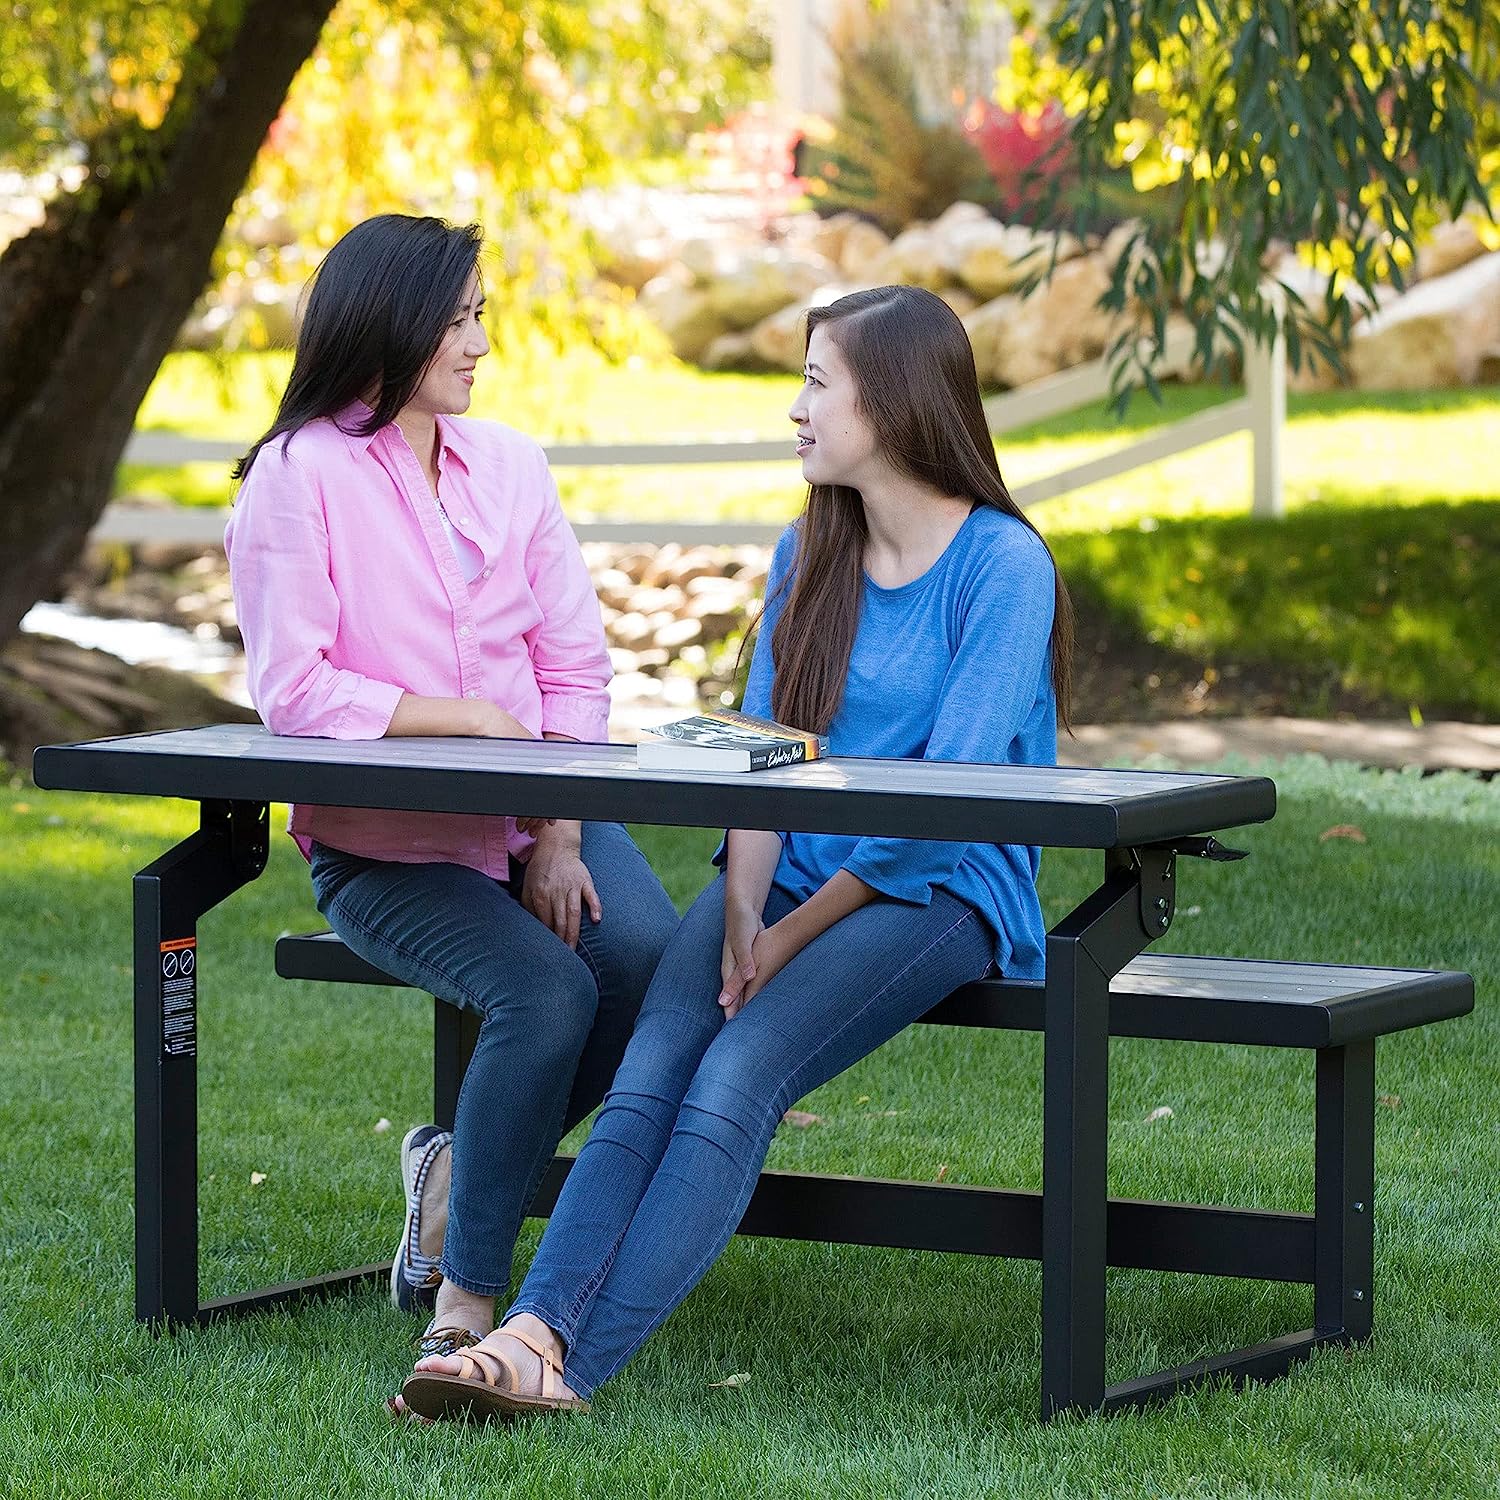 Convertible garden bench with two women chatting and sitting on it.